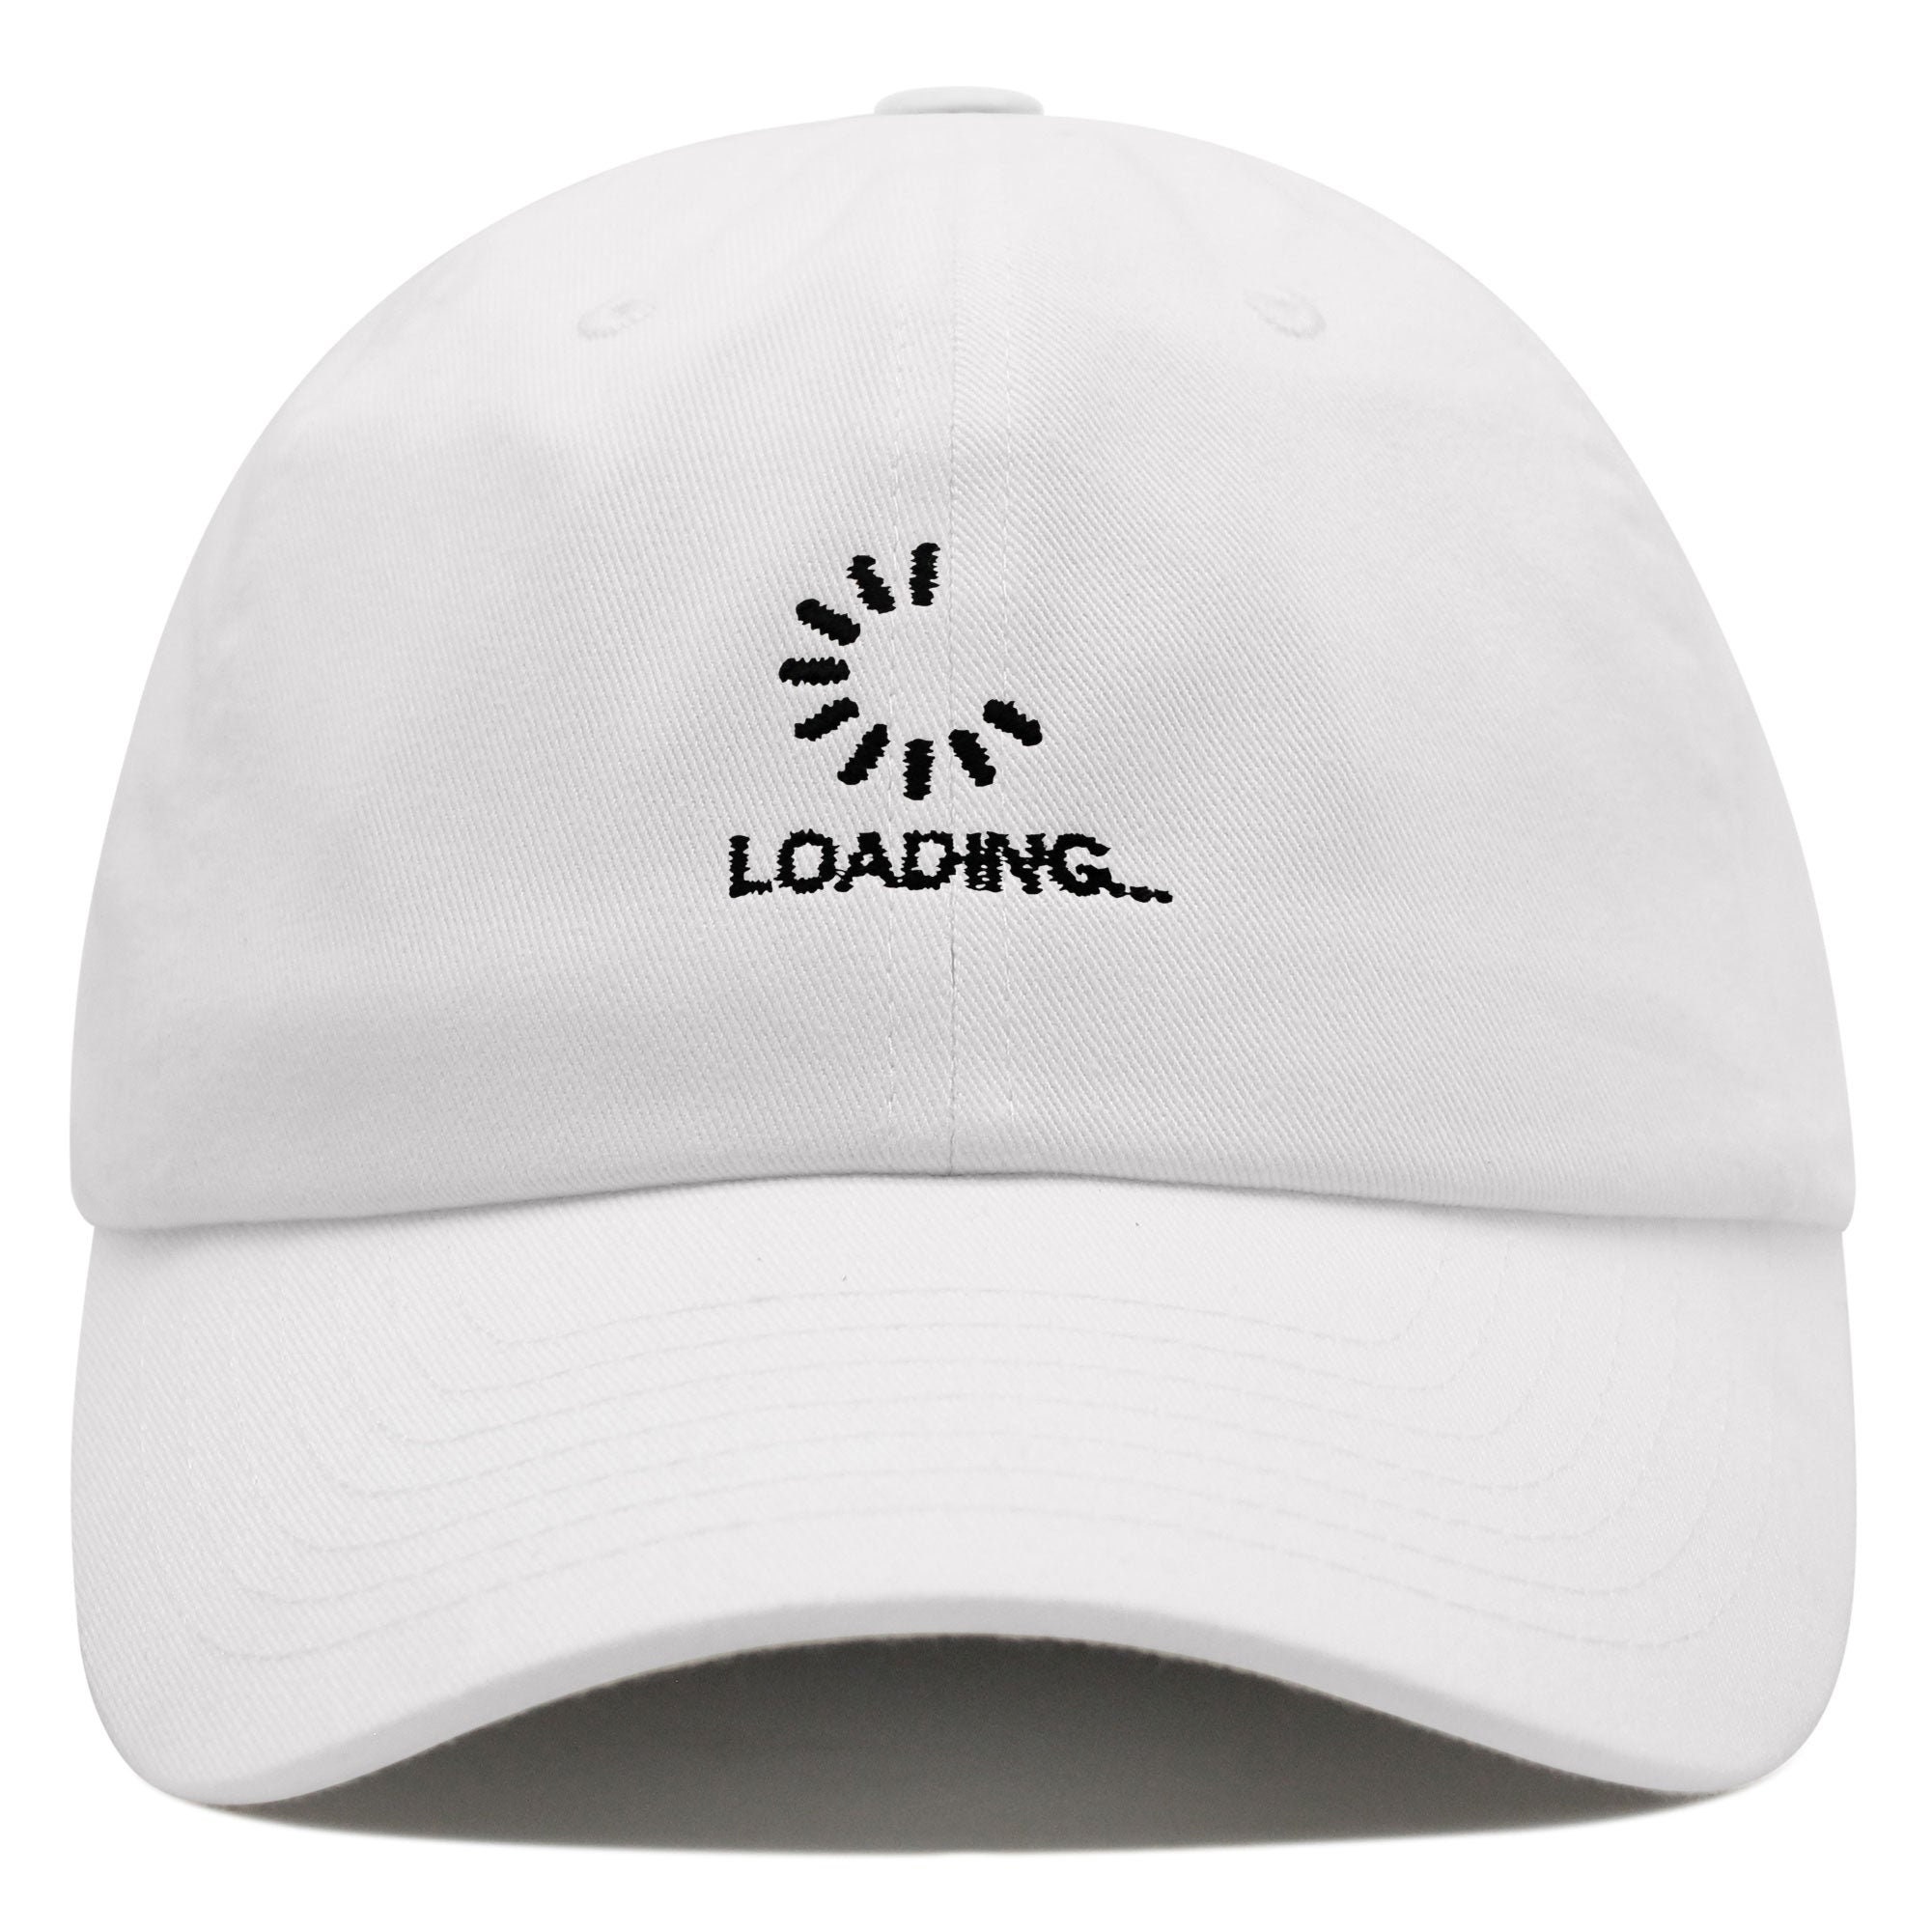 Loading Premium Dad Hat Embroidered Baseball Cap Funny